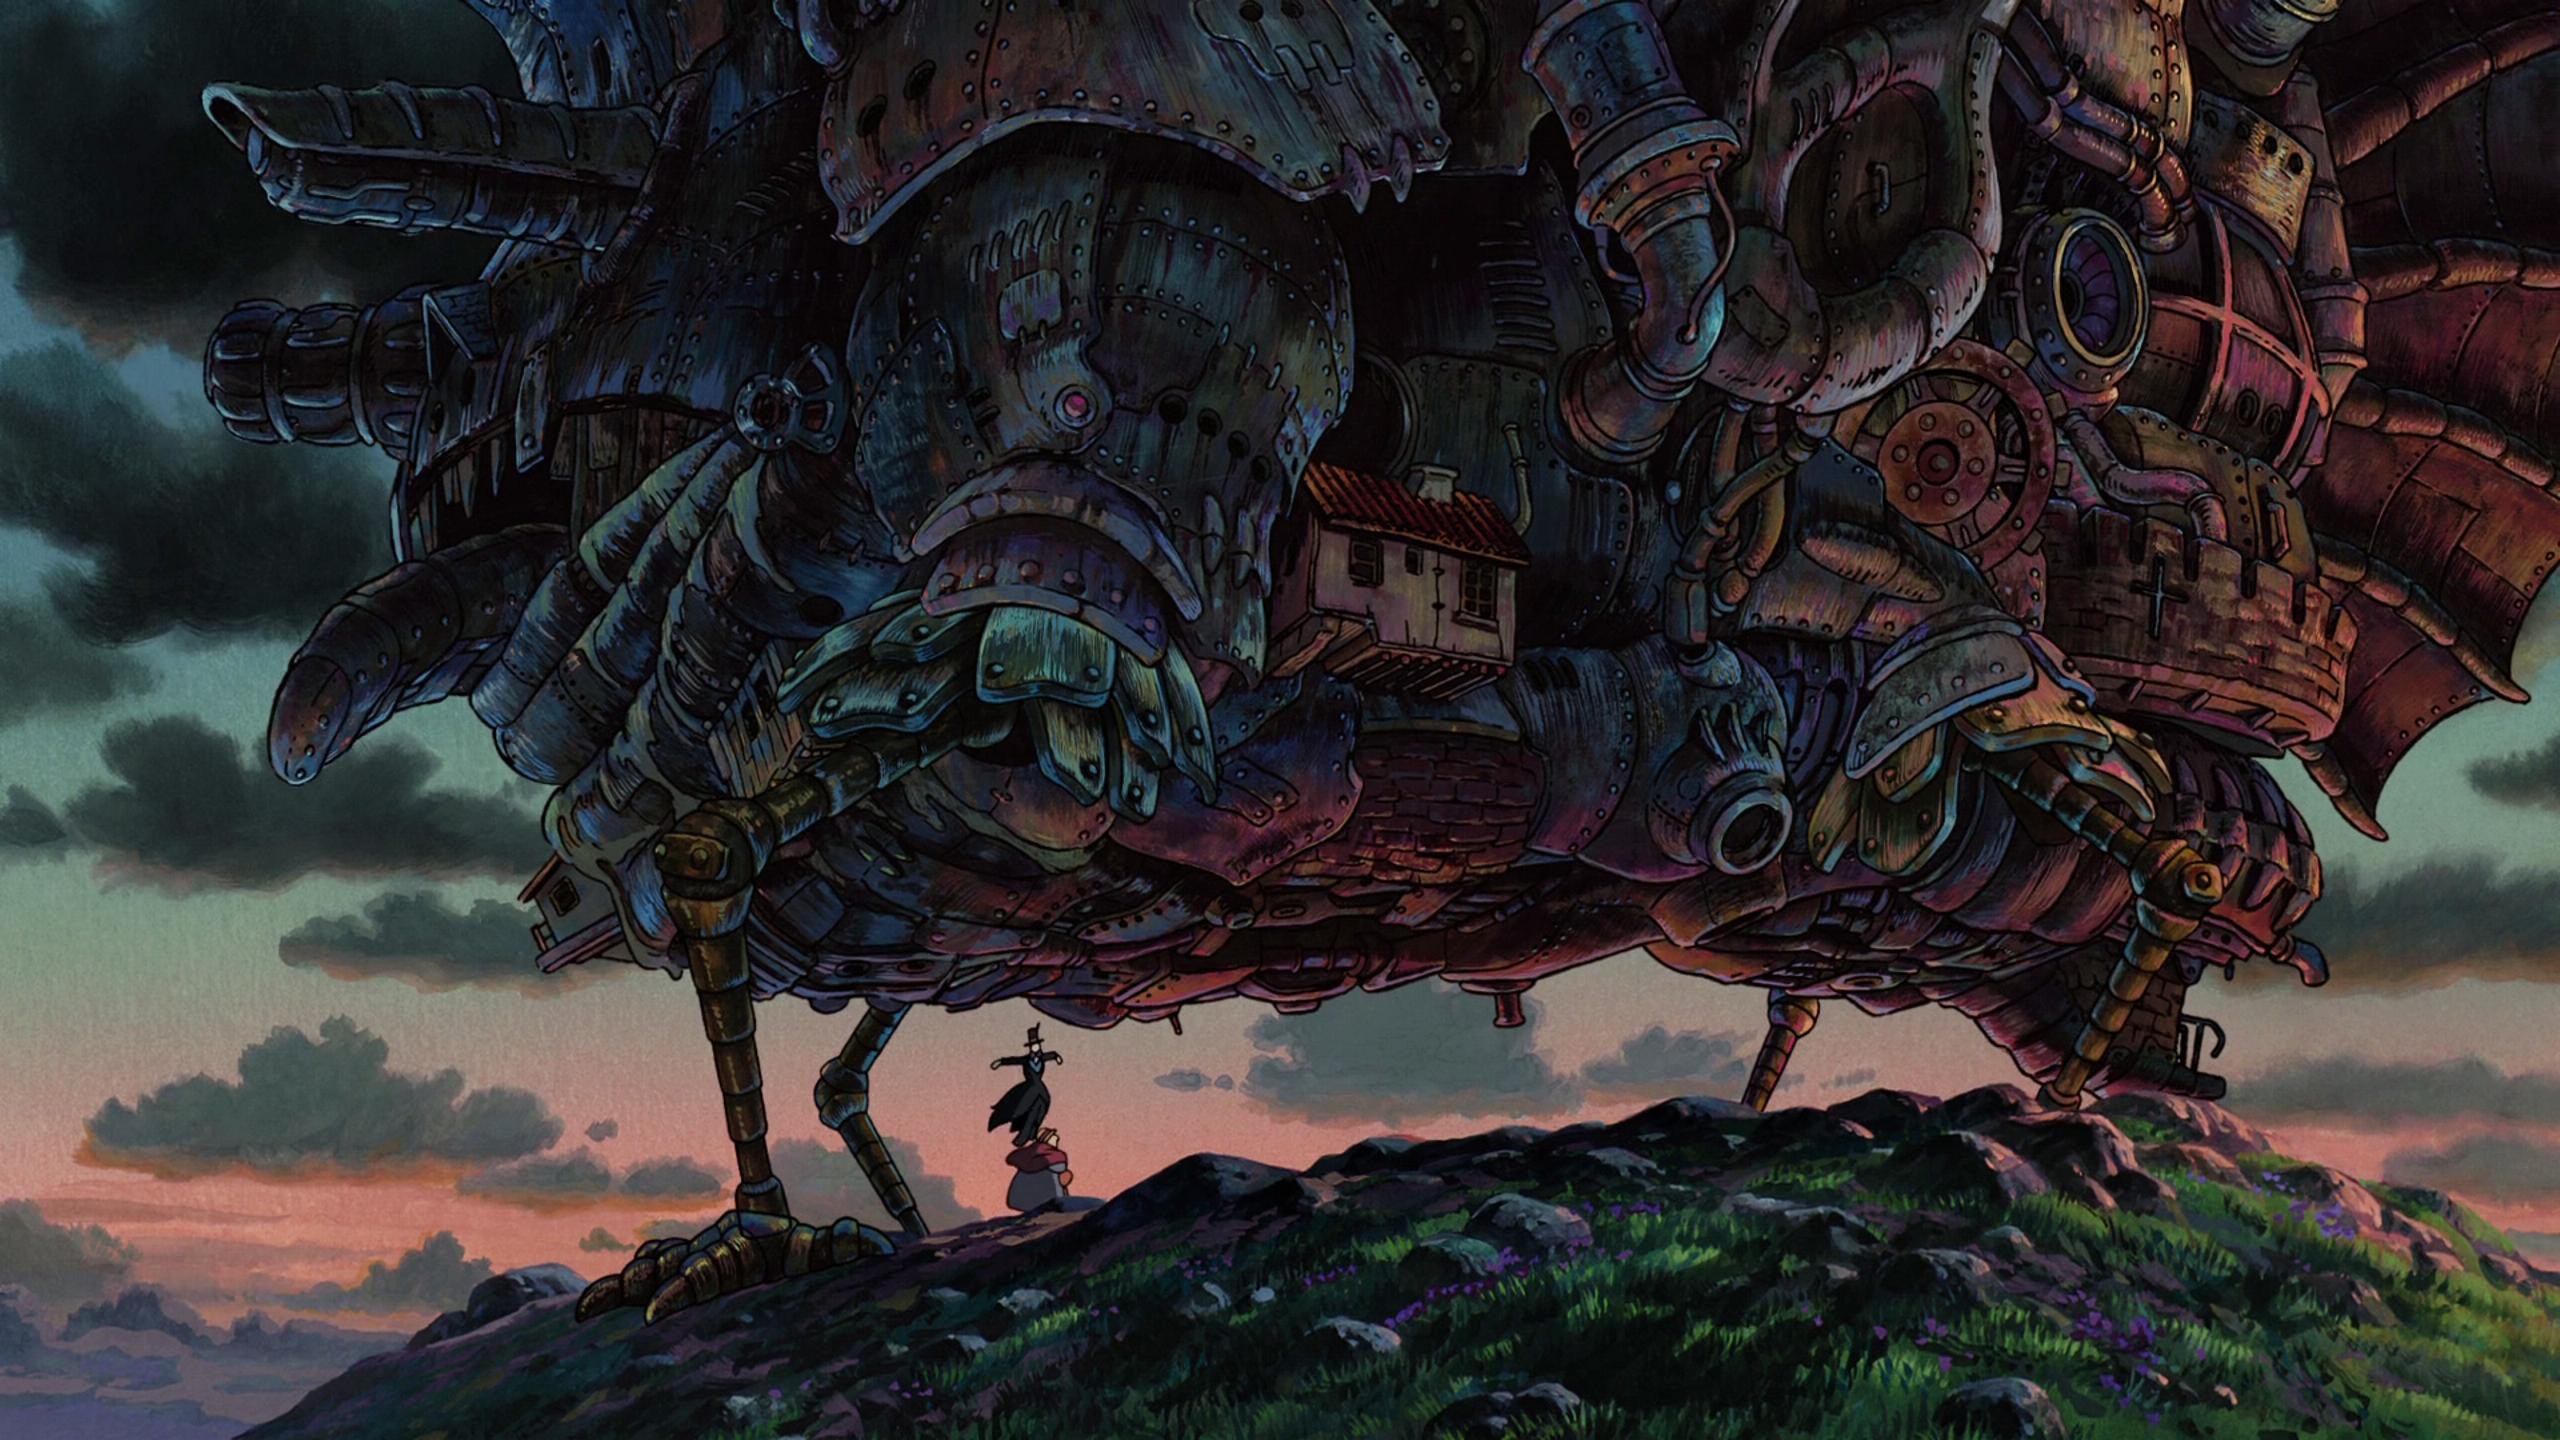 2560x1440 Gorgeous Studio Ghibli Wallpapers - Off-Topic Discussion .